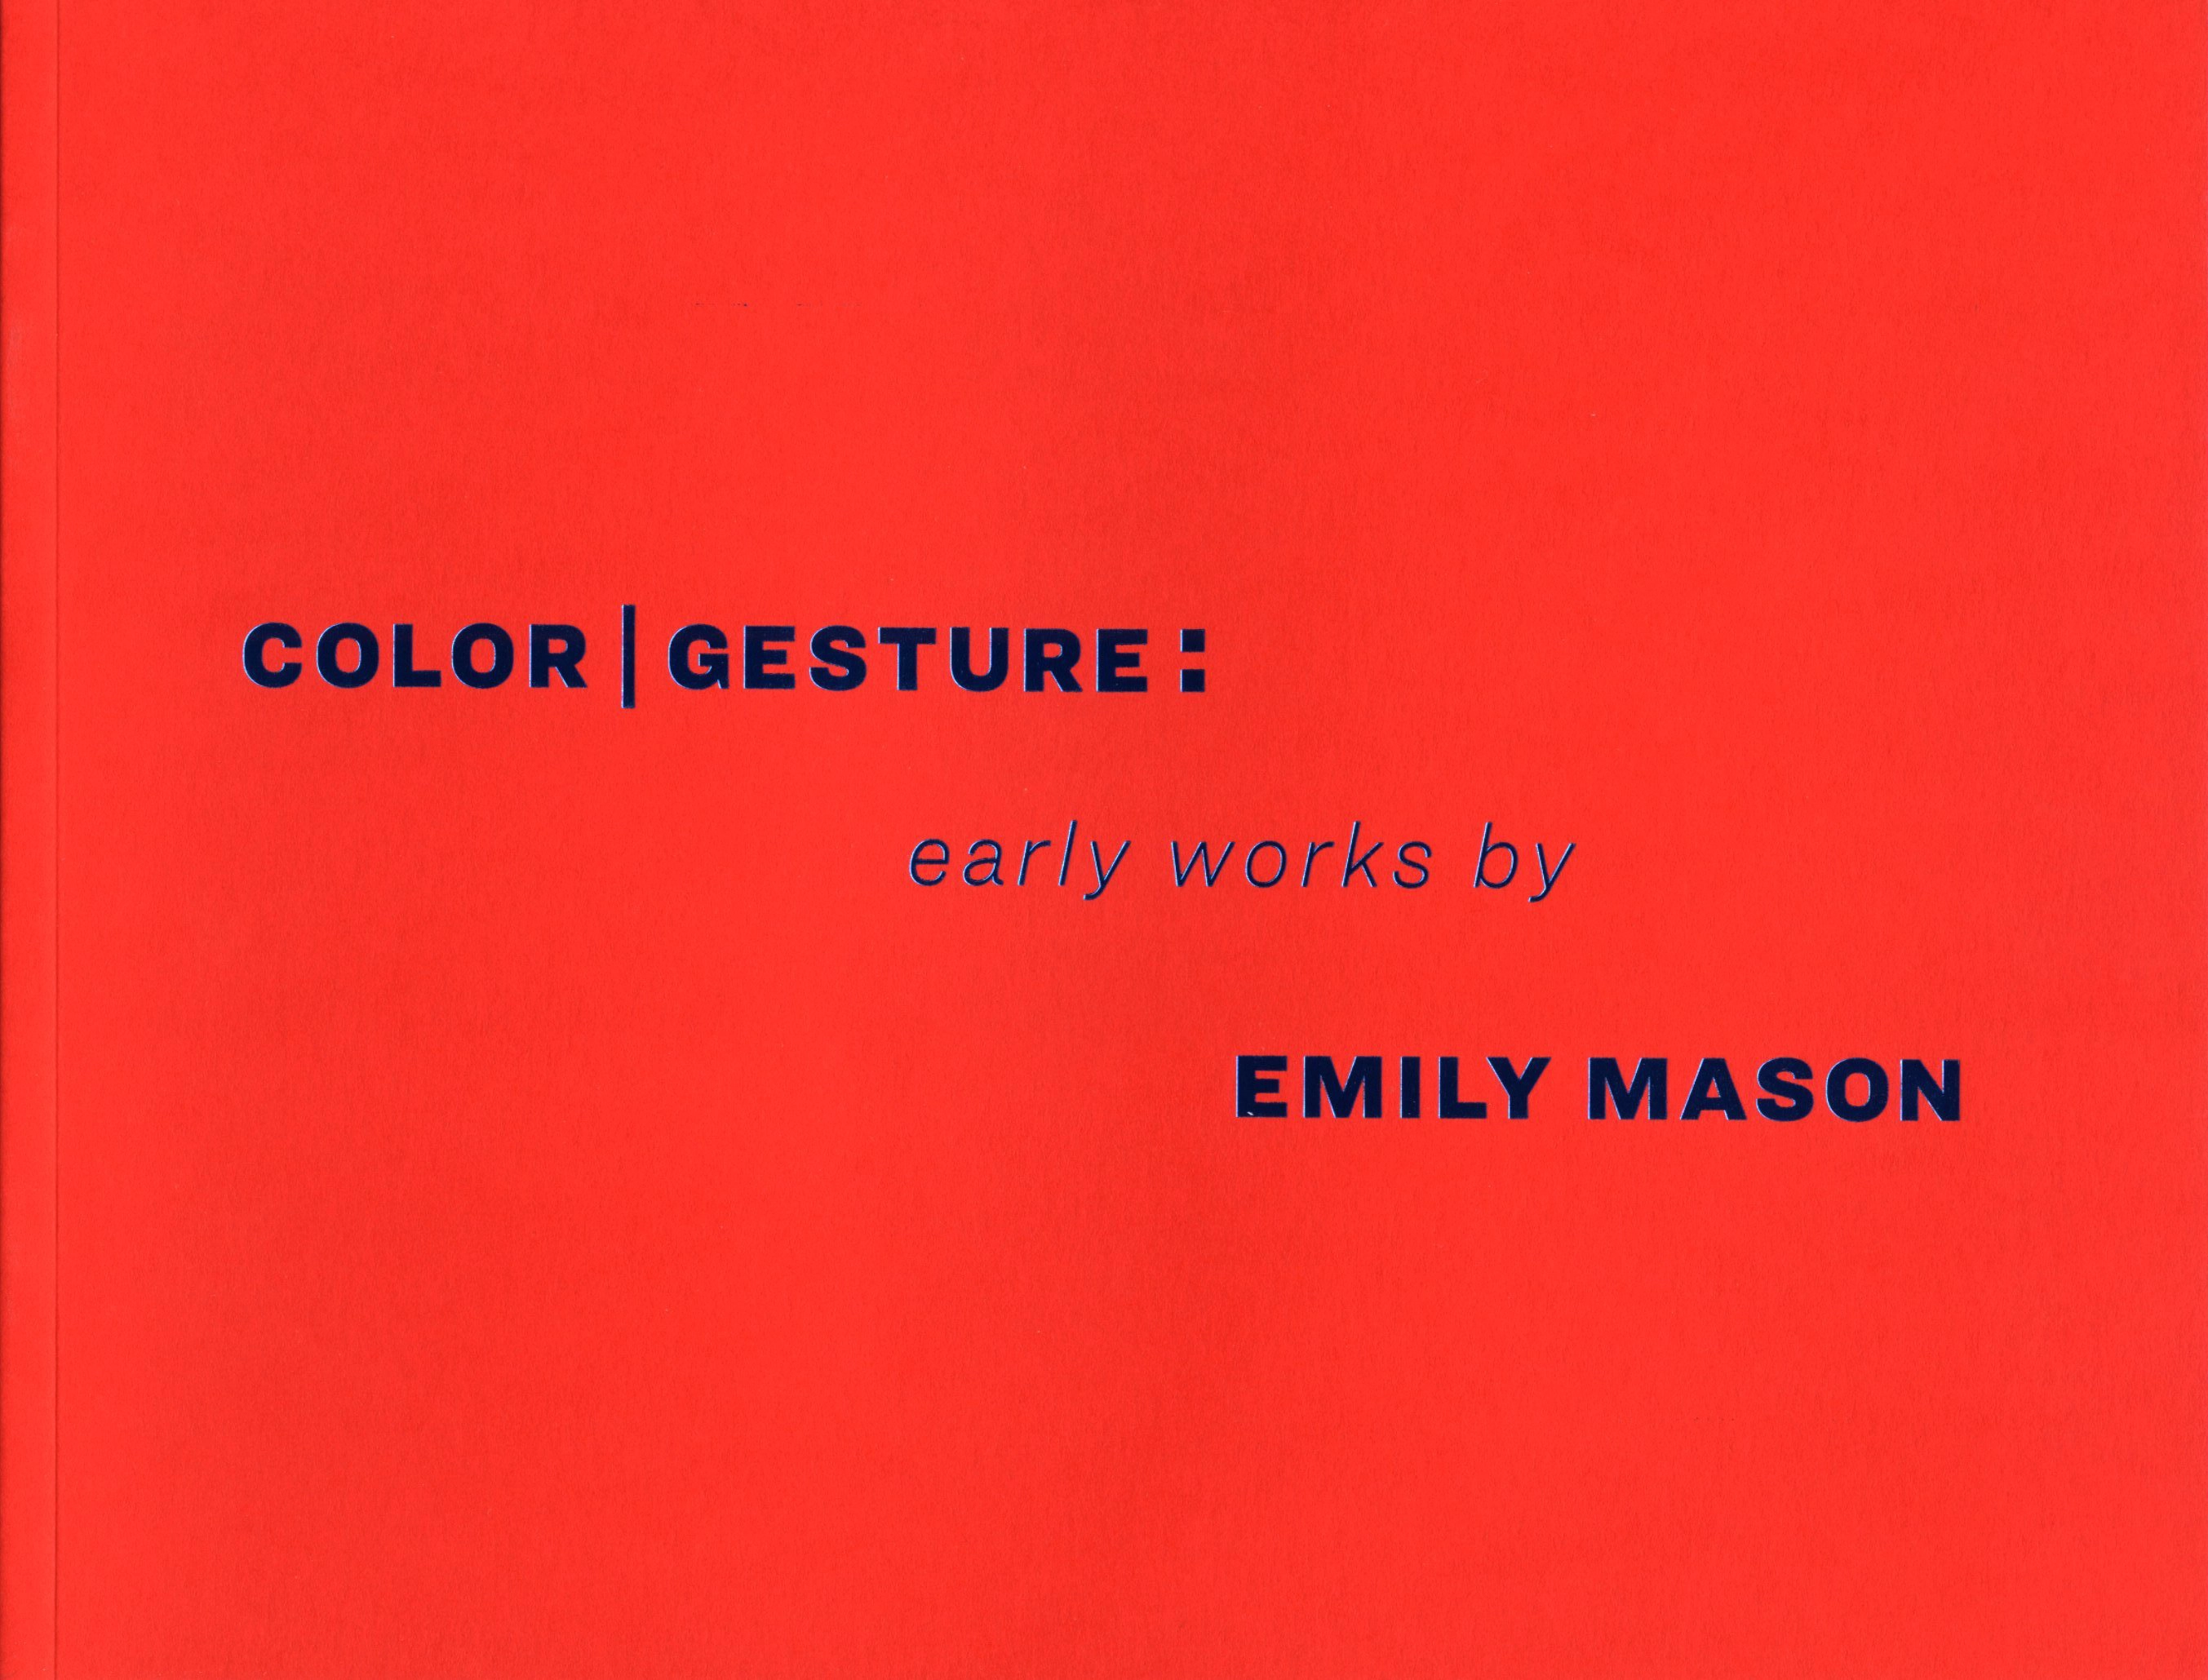 Red book cover with blue text that reads: "Color|Gesture, early works by Emily Mason."